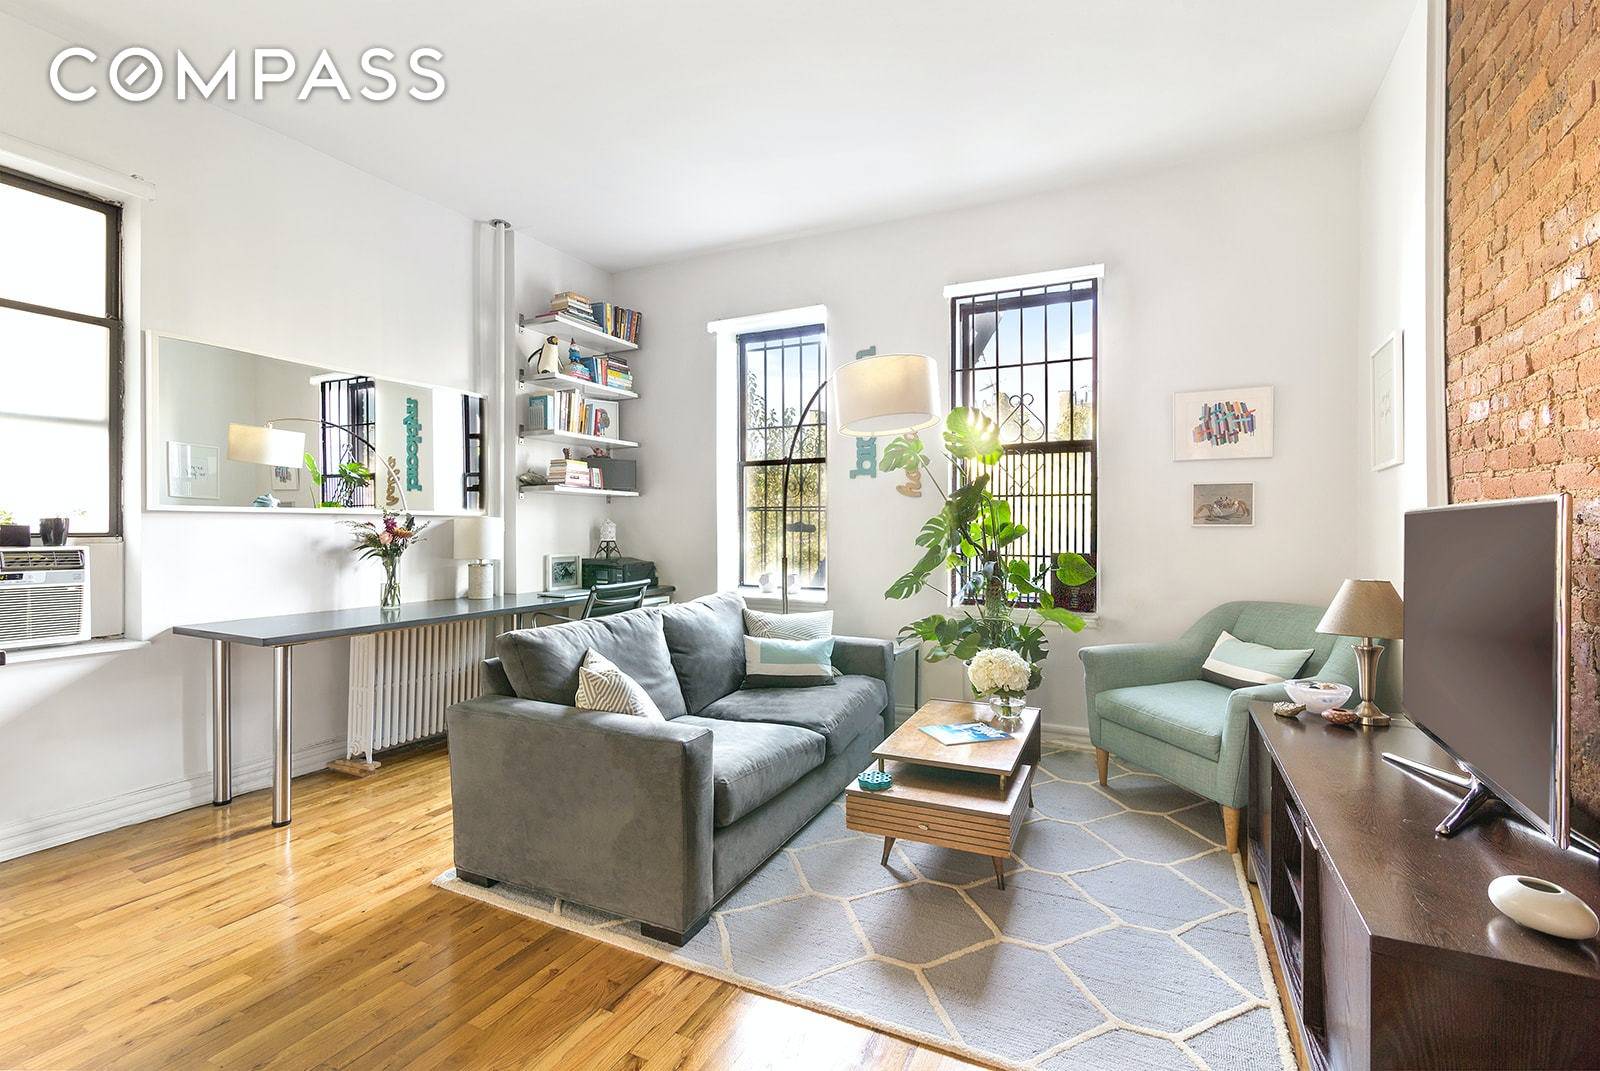 That rare bird a one bedroom, pre war CONDO on the border between Prospect Heights and Crown Heights, situated between bustling Vanderbilt, Washington, and Franklin Avenues.